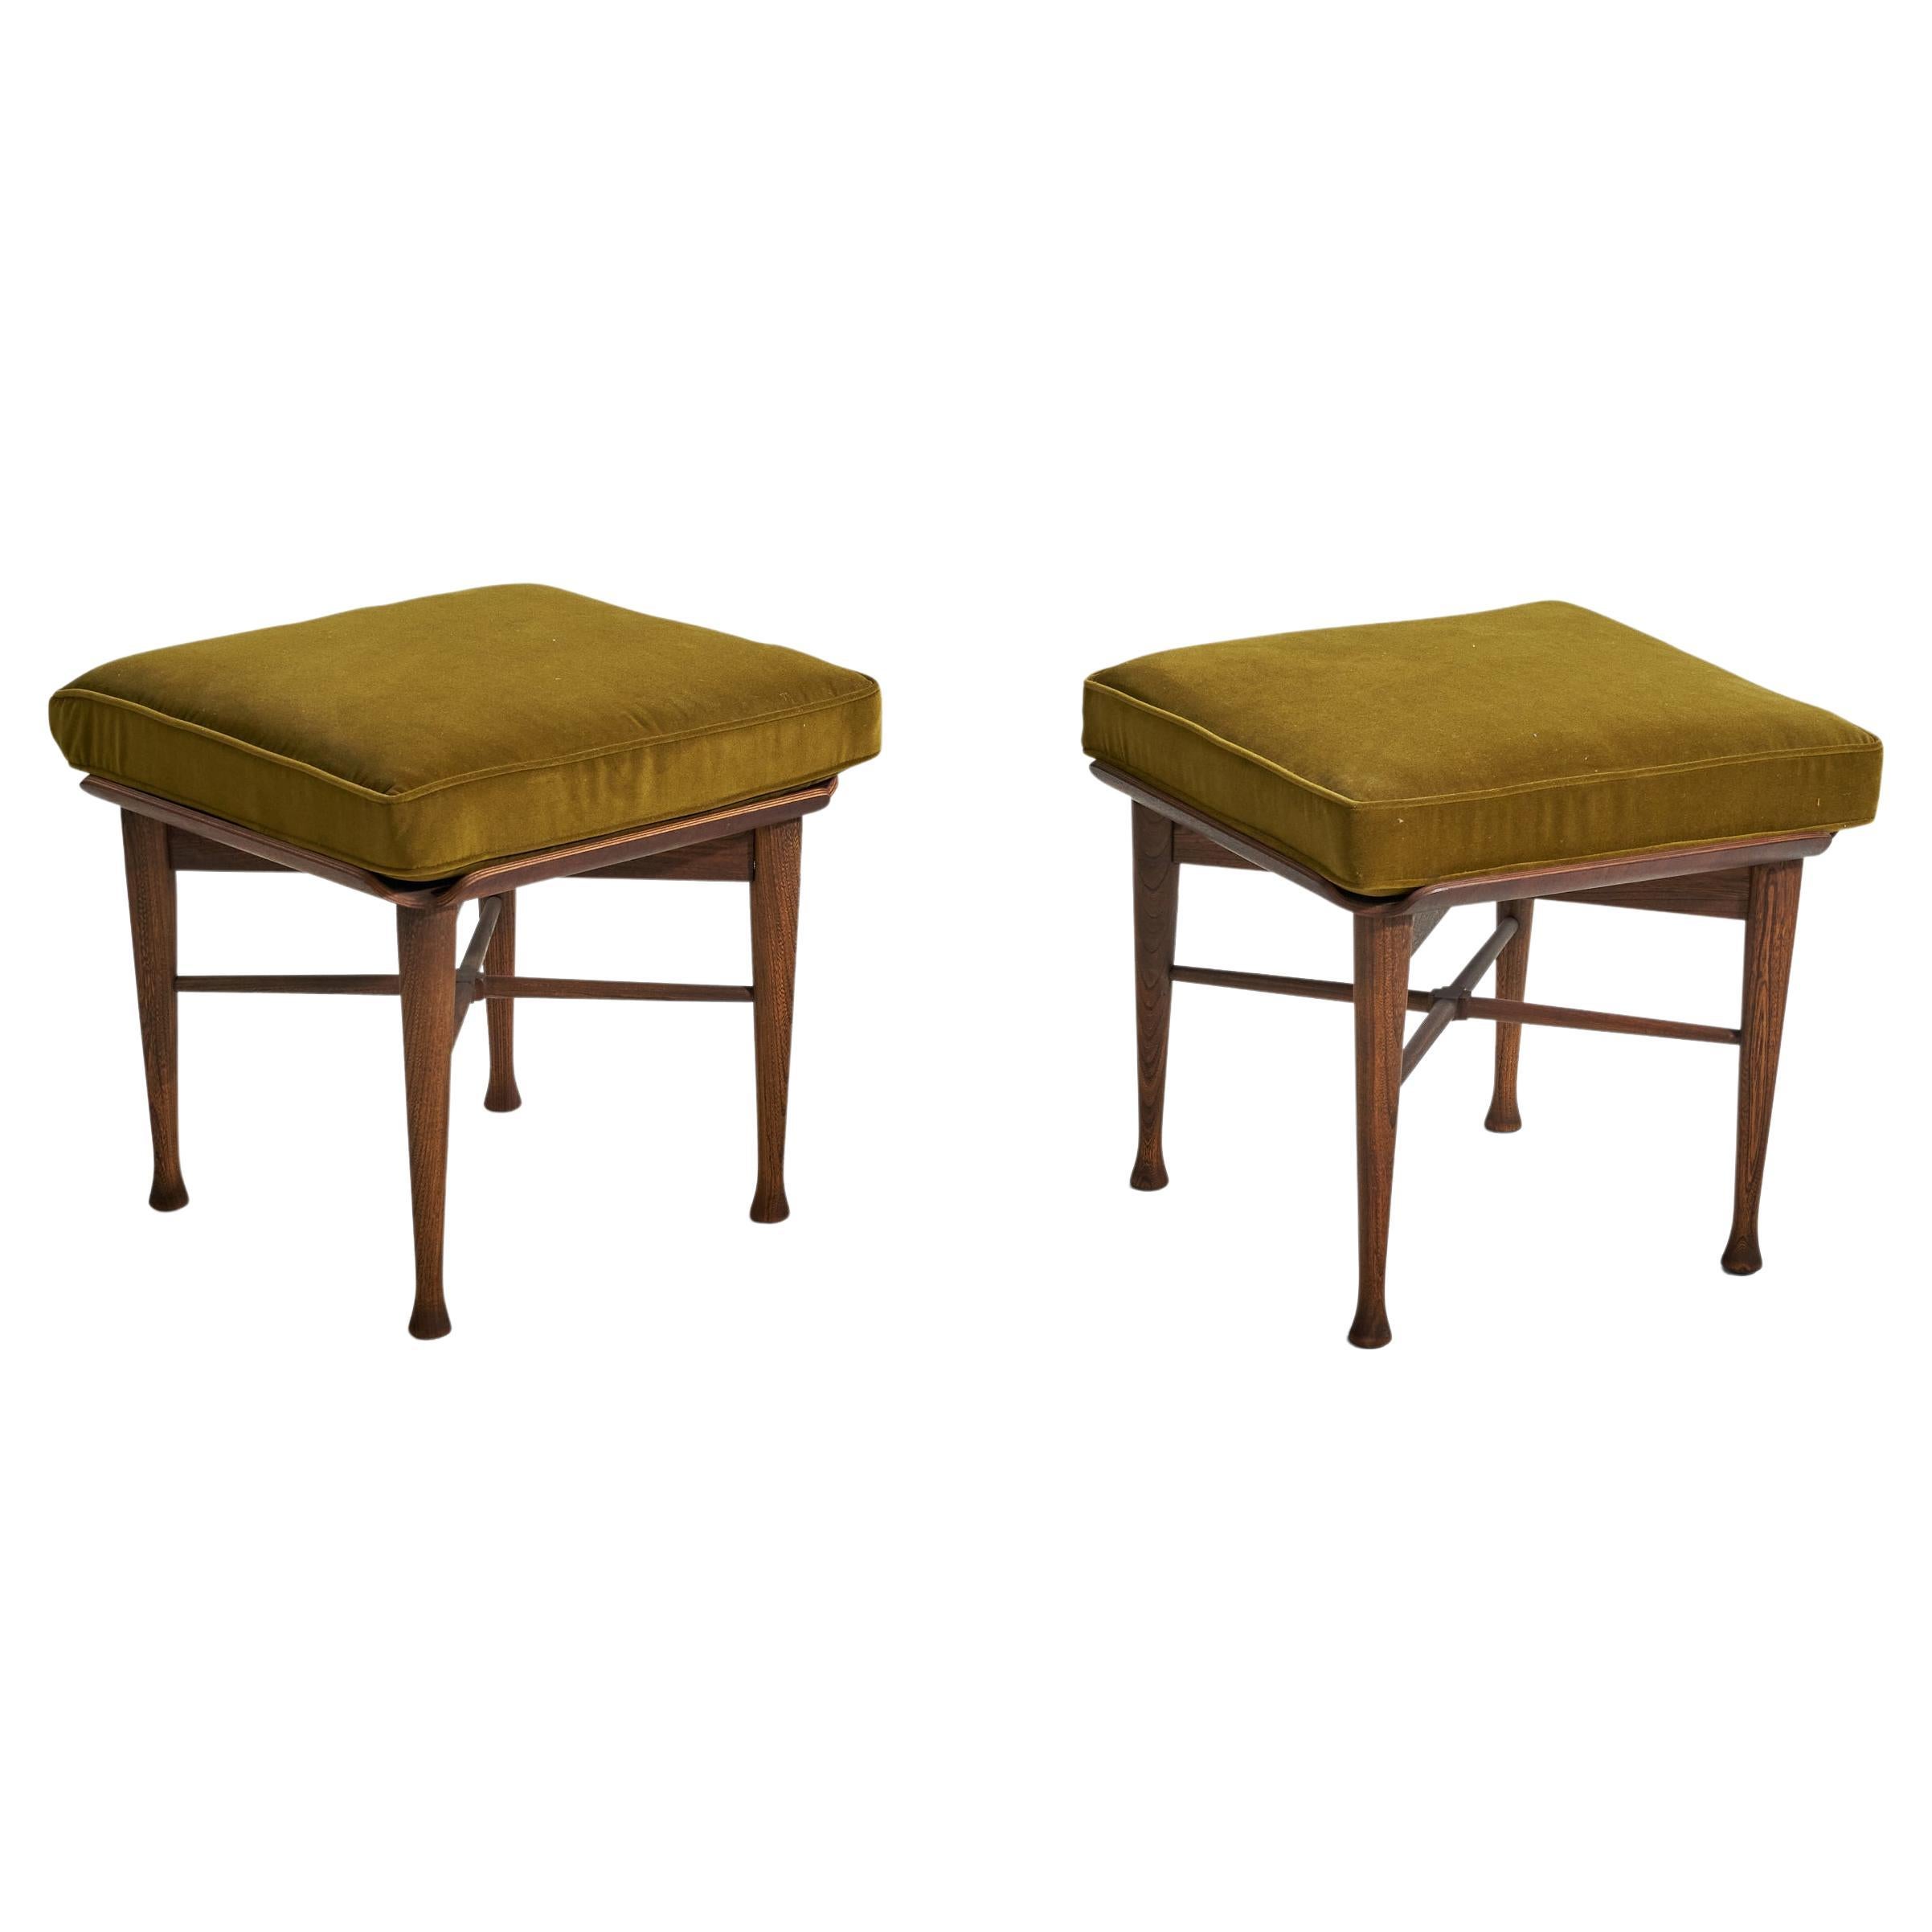 Lawrence Peabody, Stools, Walnut, Fabric, United States, 1960s For Sale